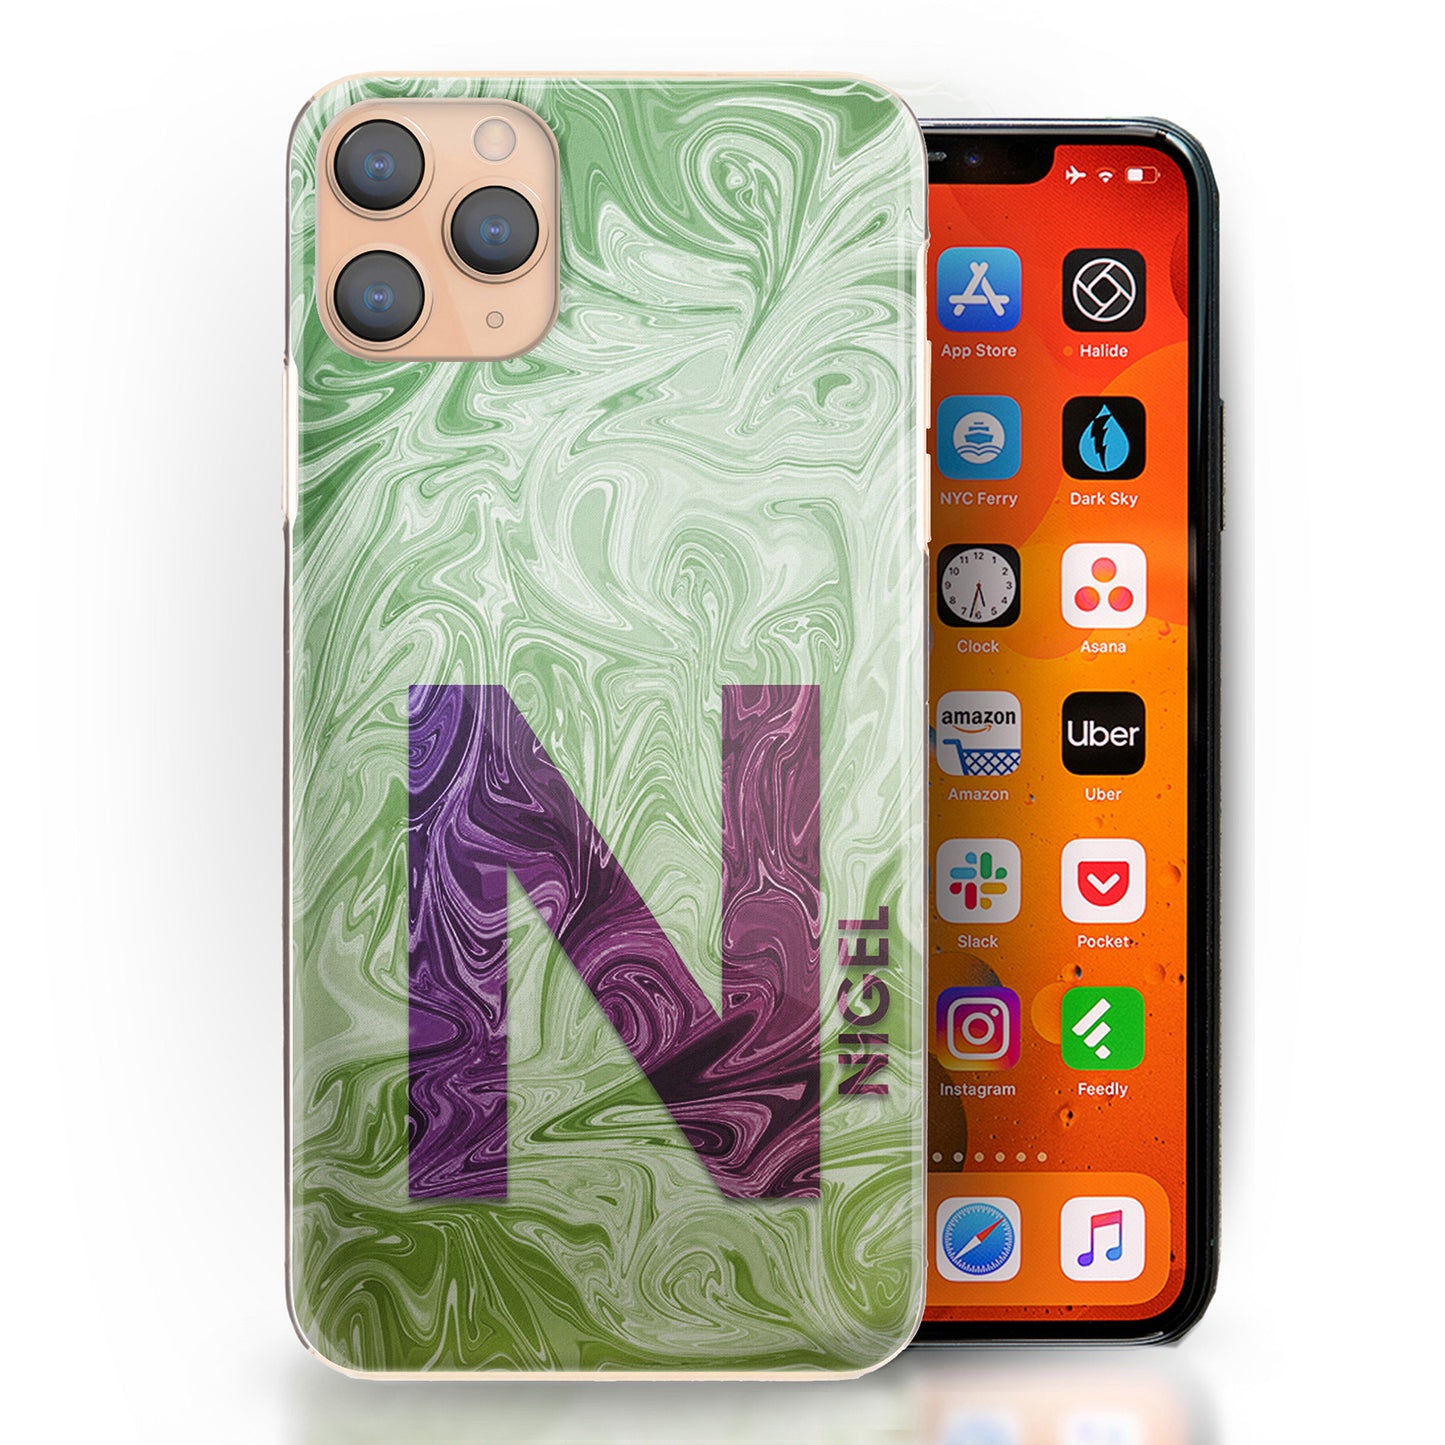 Personalised HTC Phone Hard Case with Purple Text and Initial on Green Swirled Marble